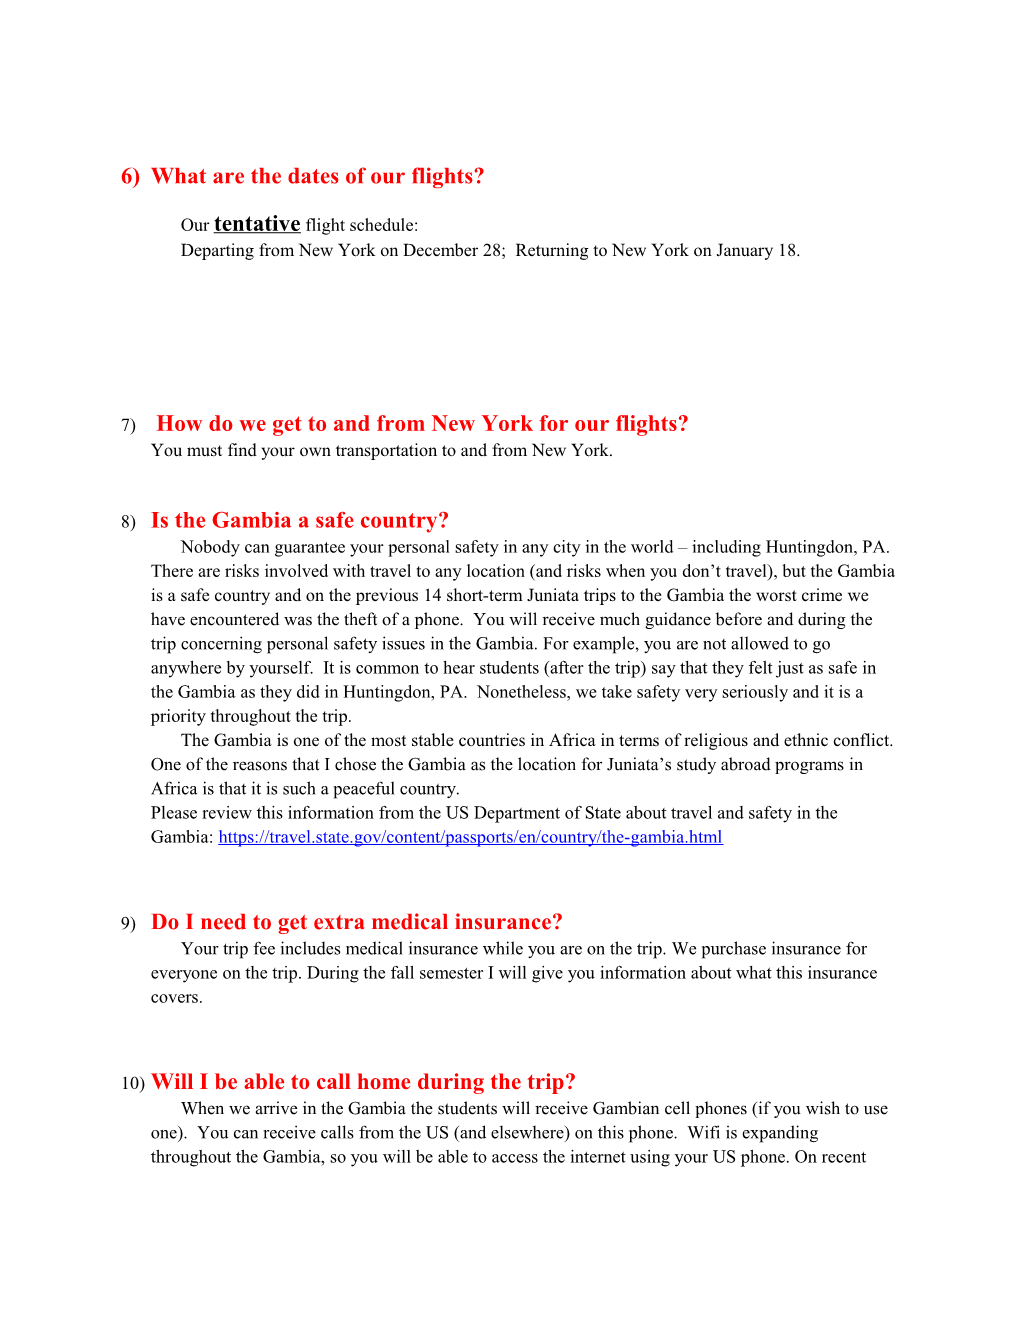 Frequently Asked Questions About the Gambia Trip